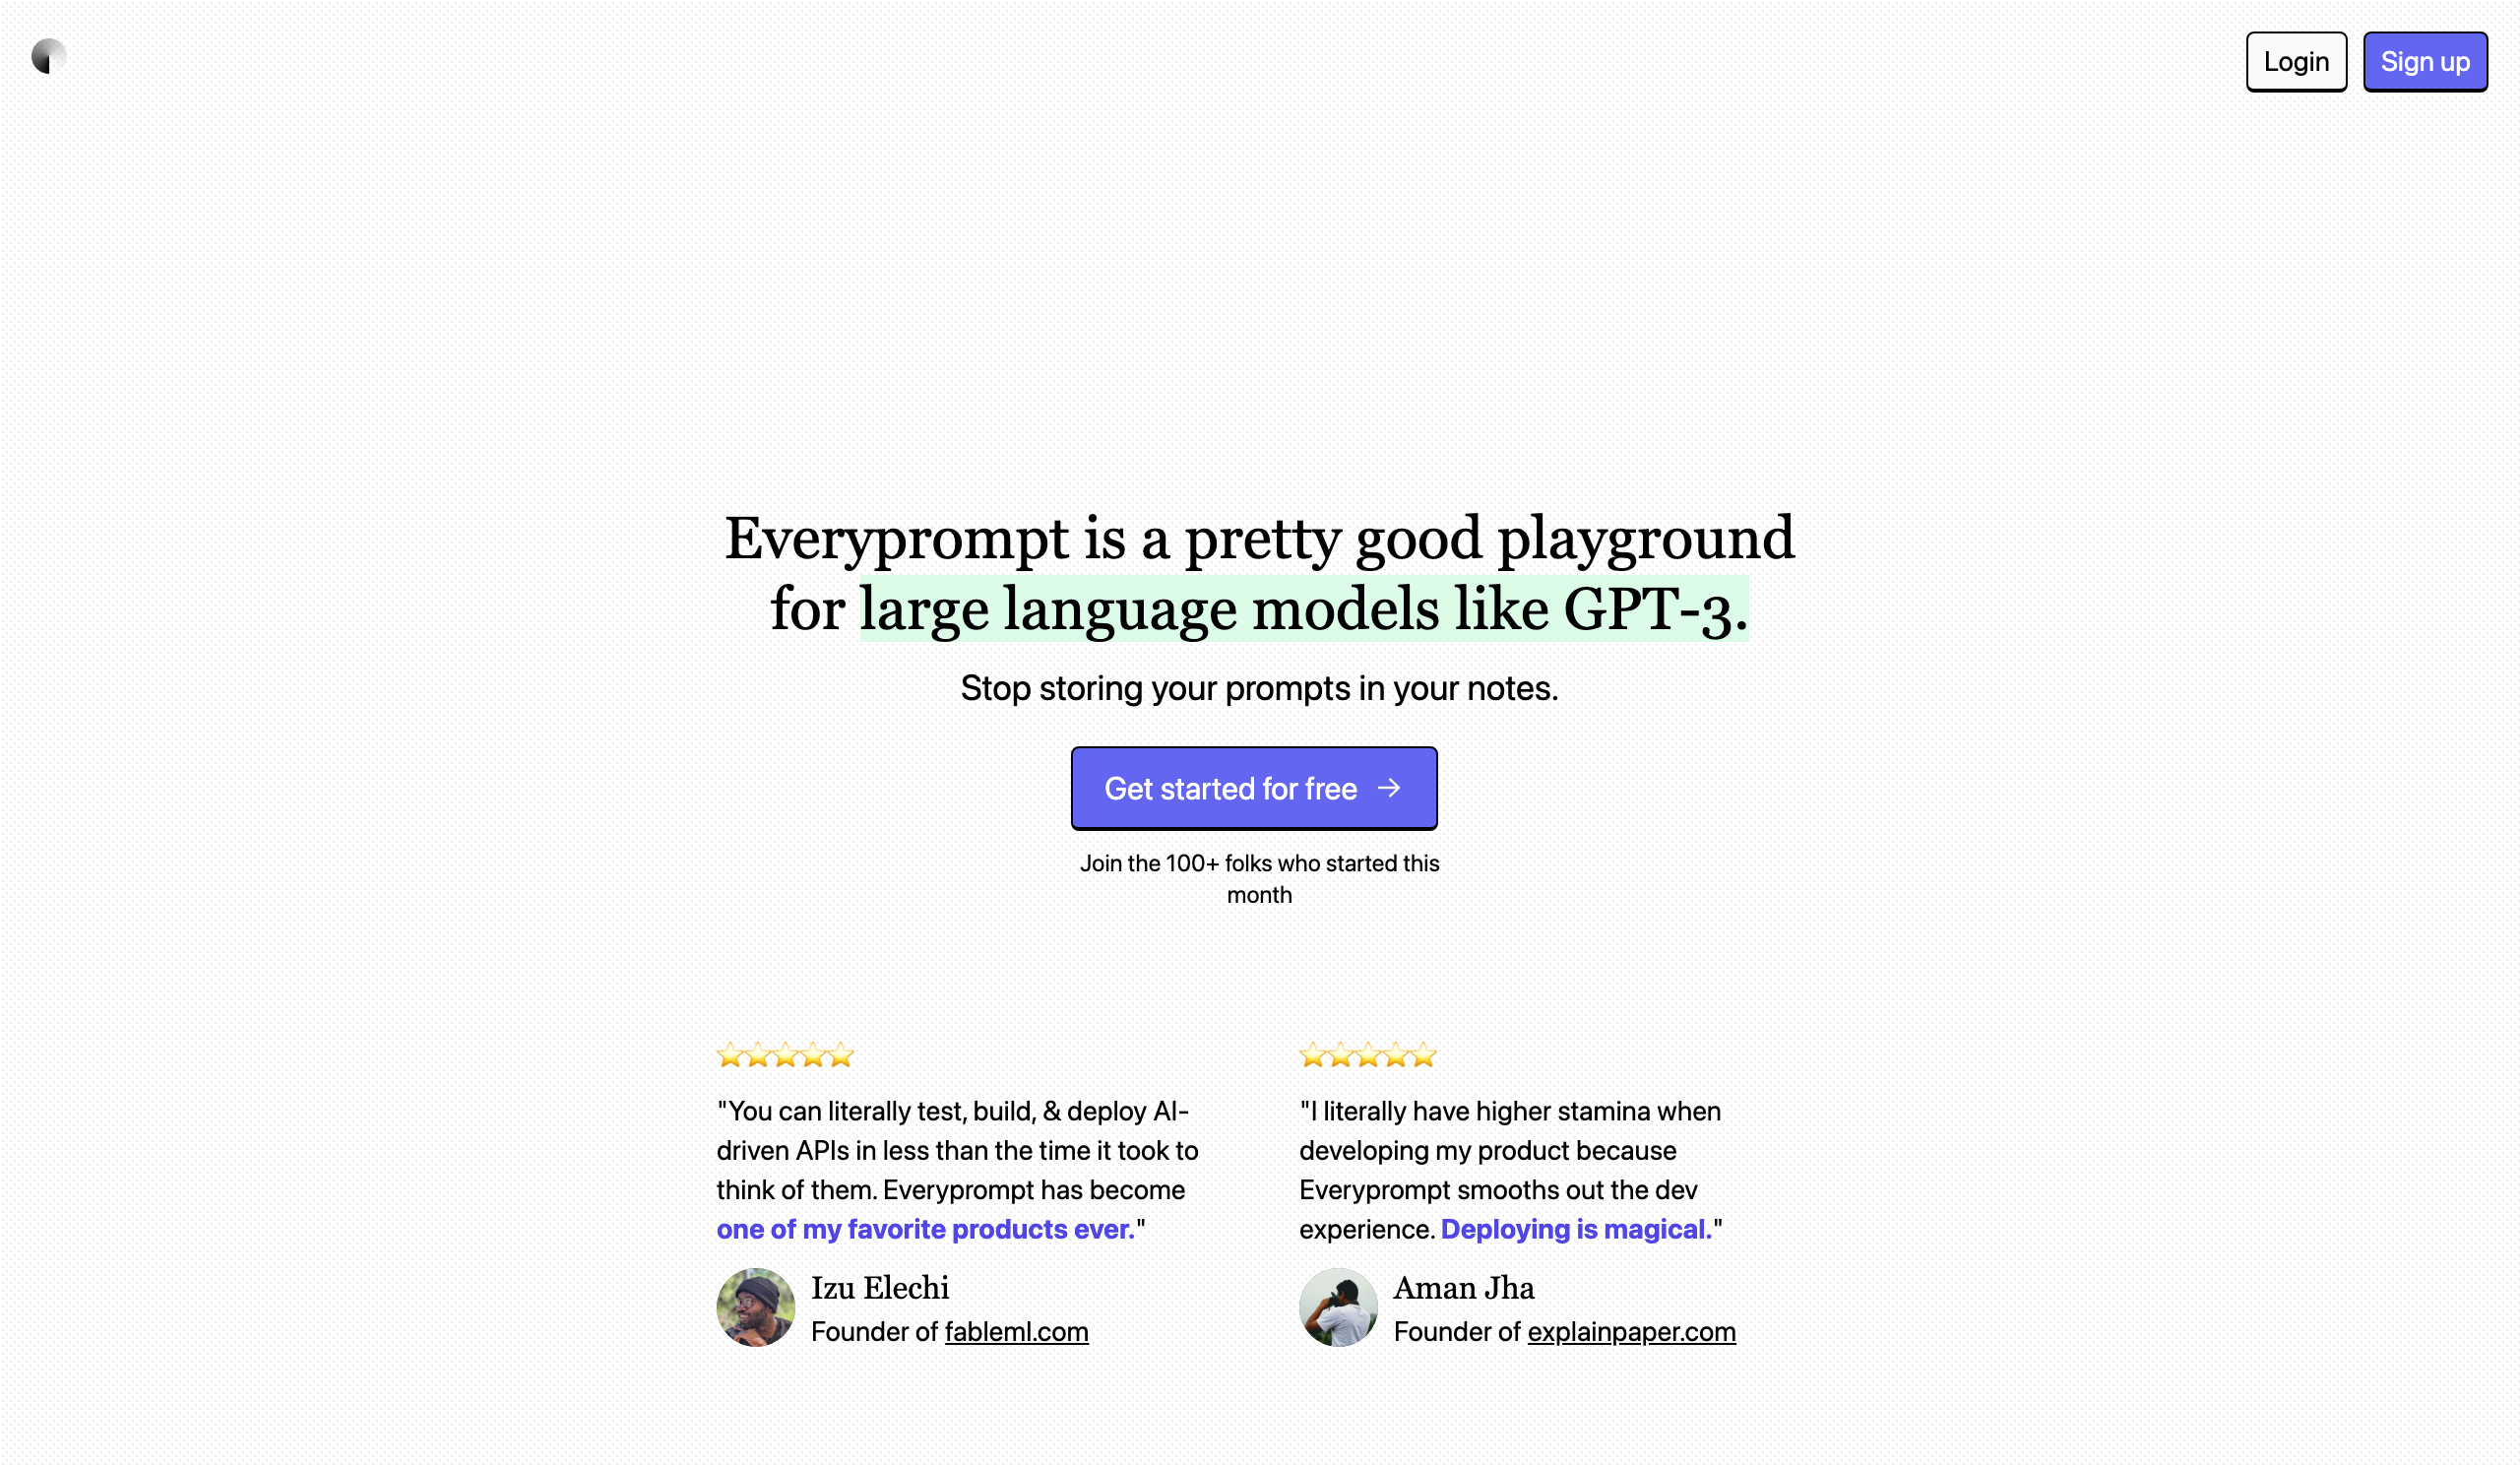 Everyprompt - screen 1